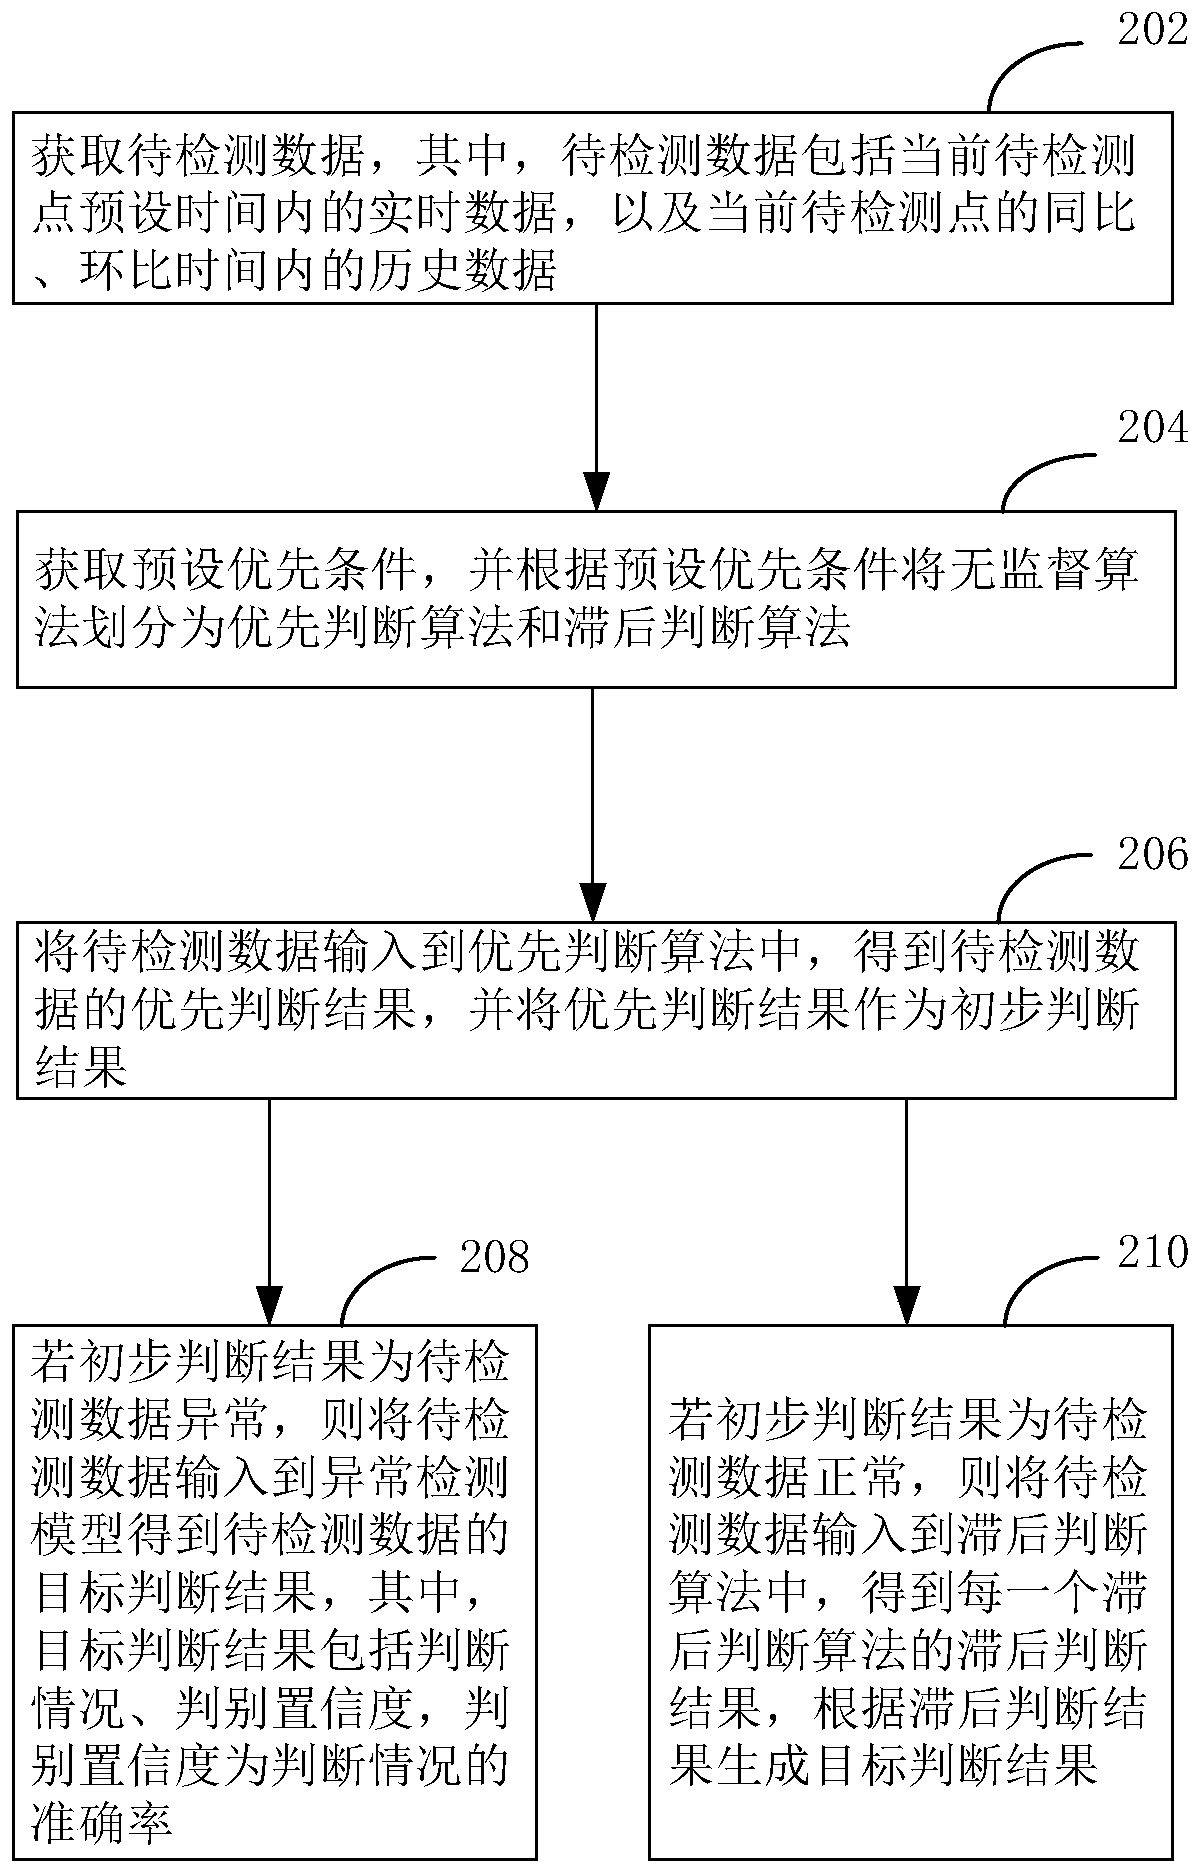 Network service abnormal data detection method and device, equipment and medium